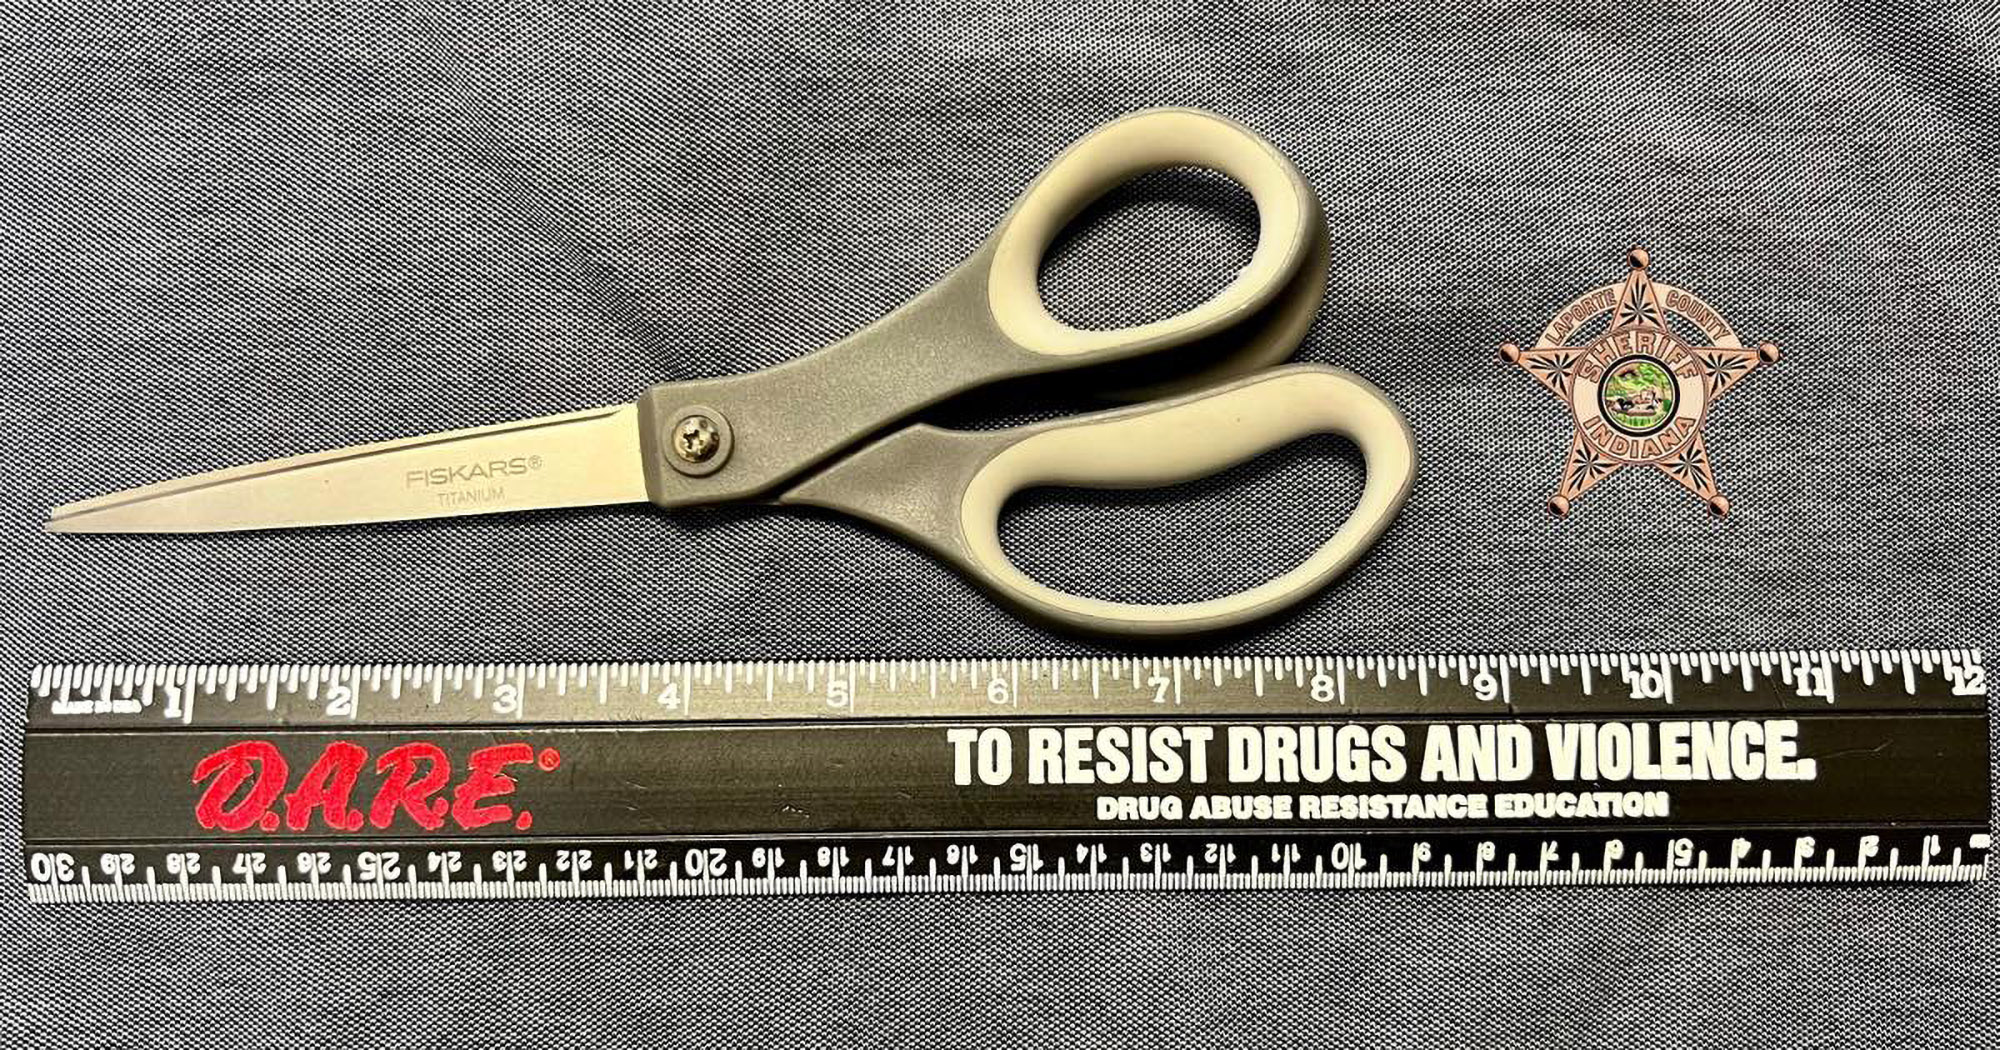 Read more about the article Man Busted Trying To Smuggle Pair Of Scissors Up His Bottom Into Prison